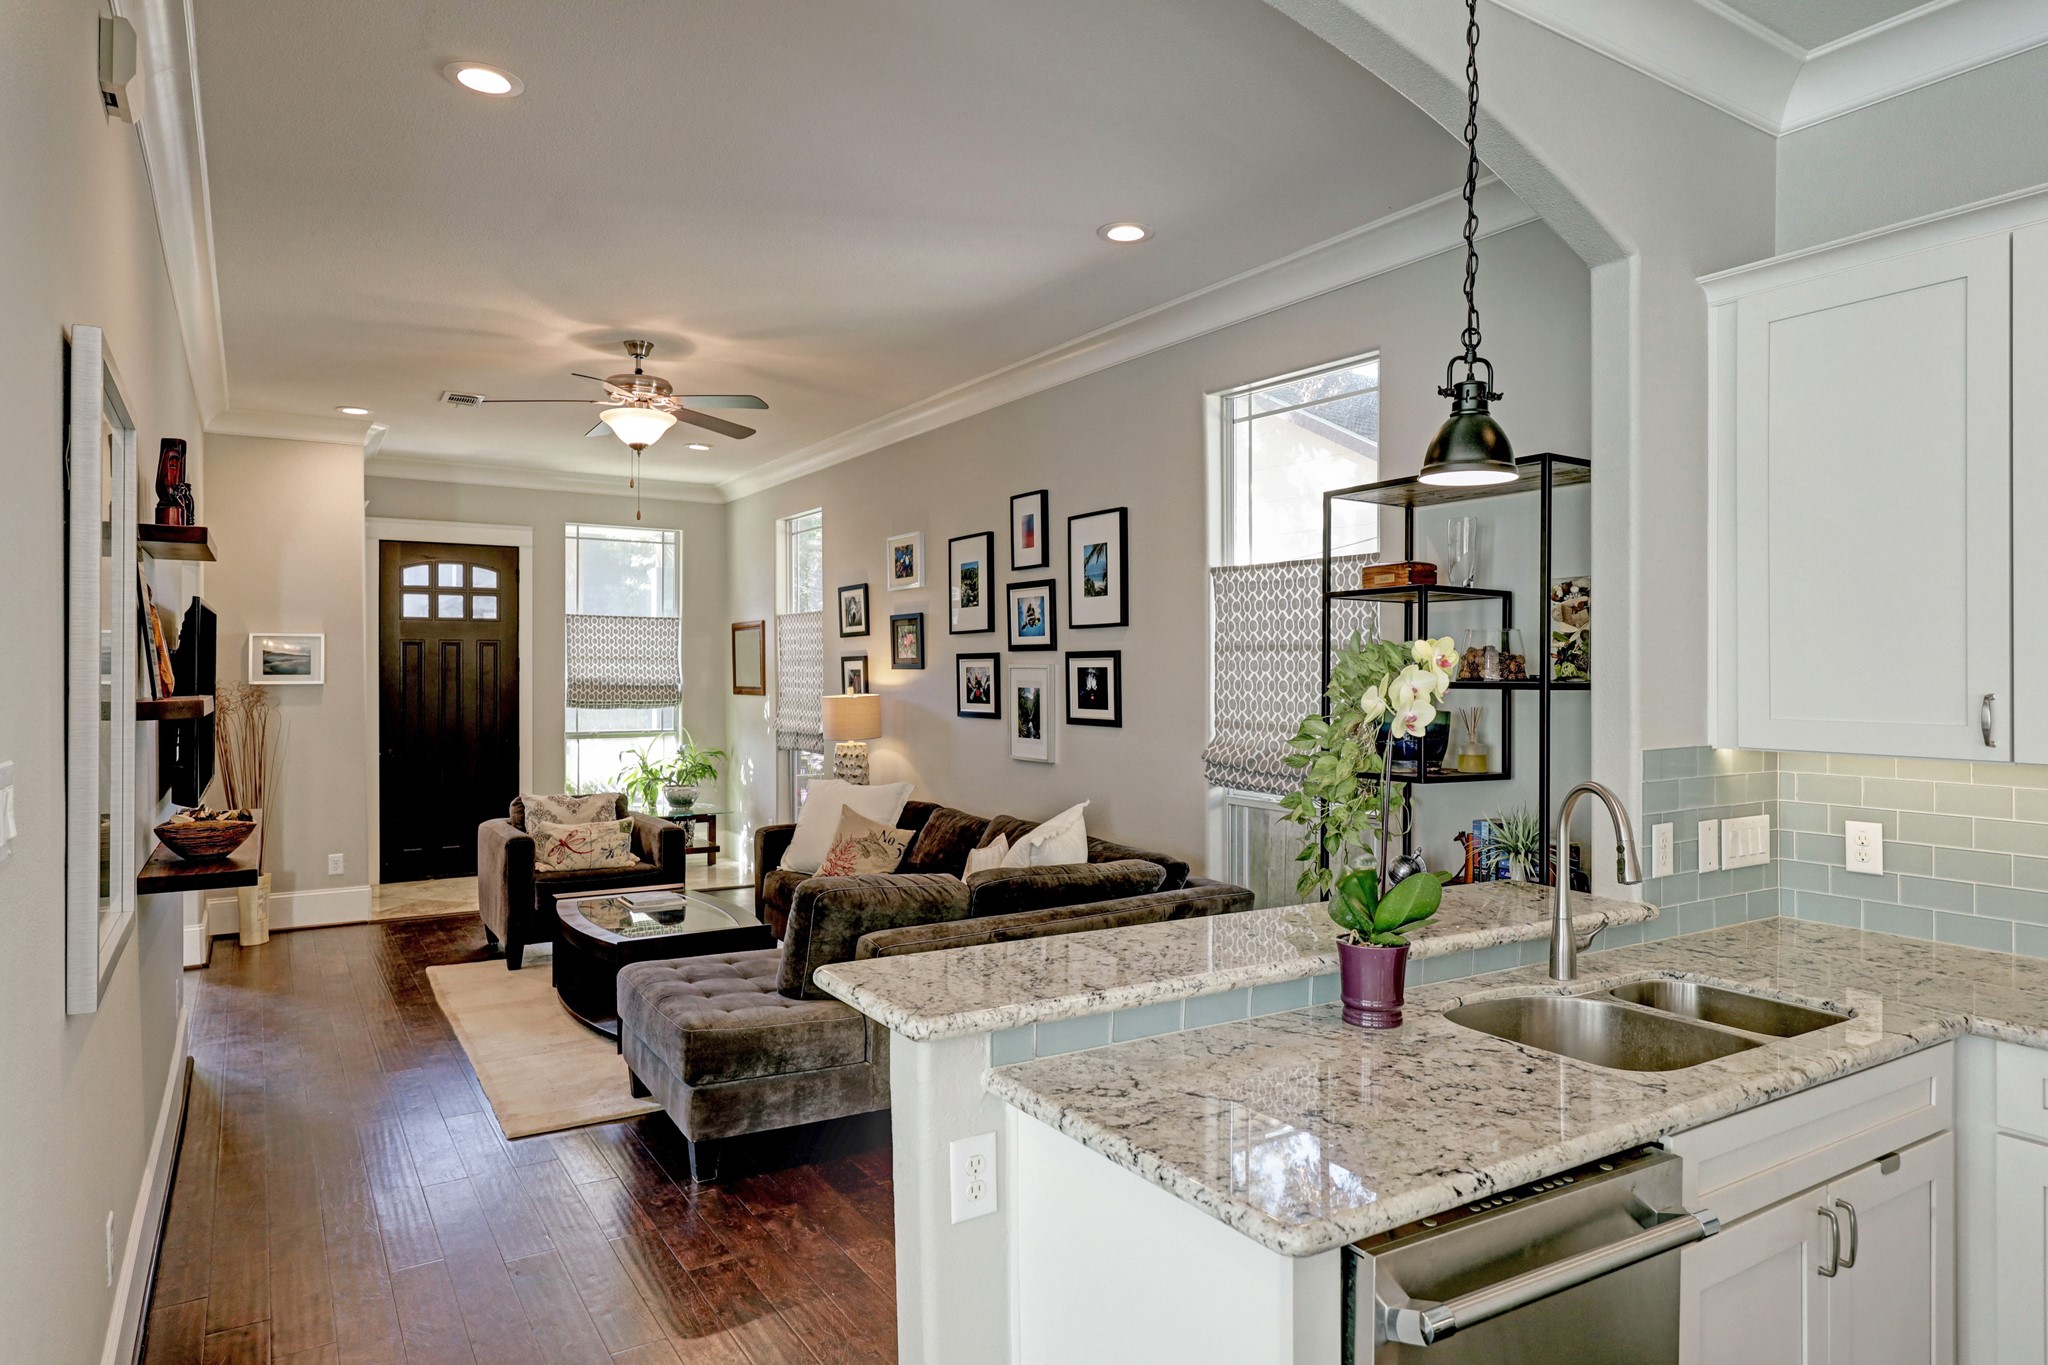 The setup is great for entertaining with the living and dining areas separated by the kitchen.